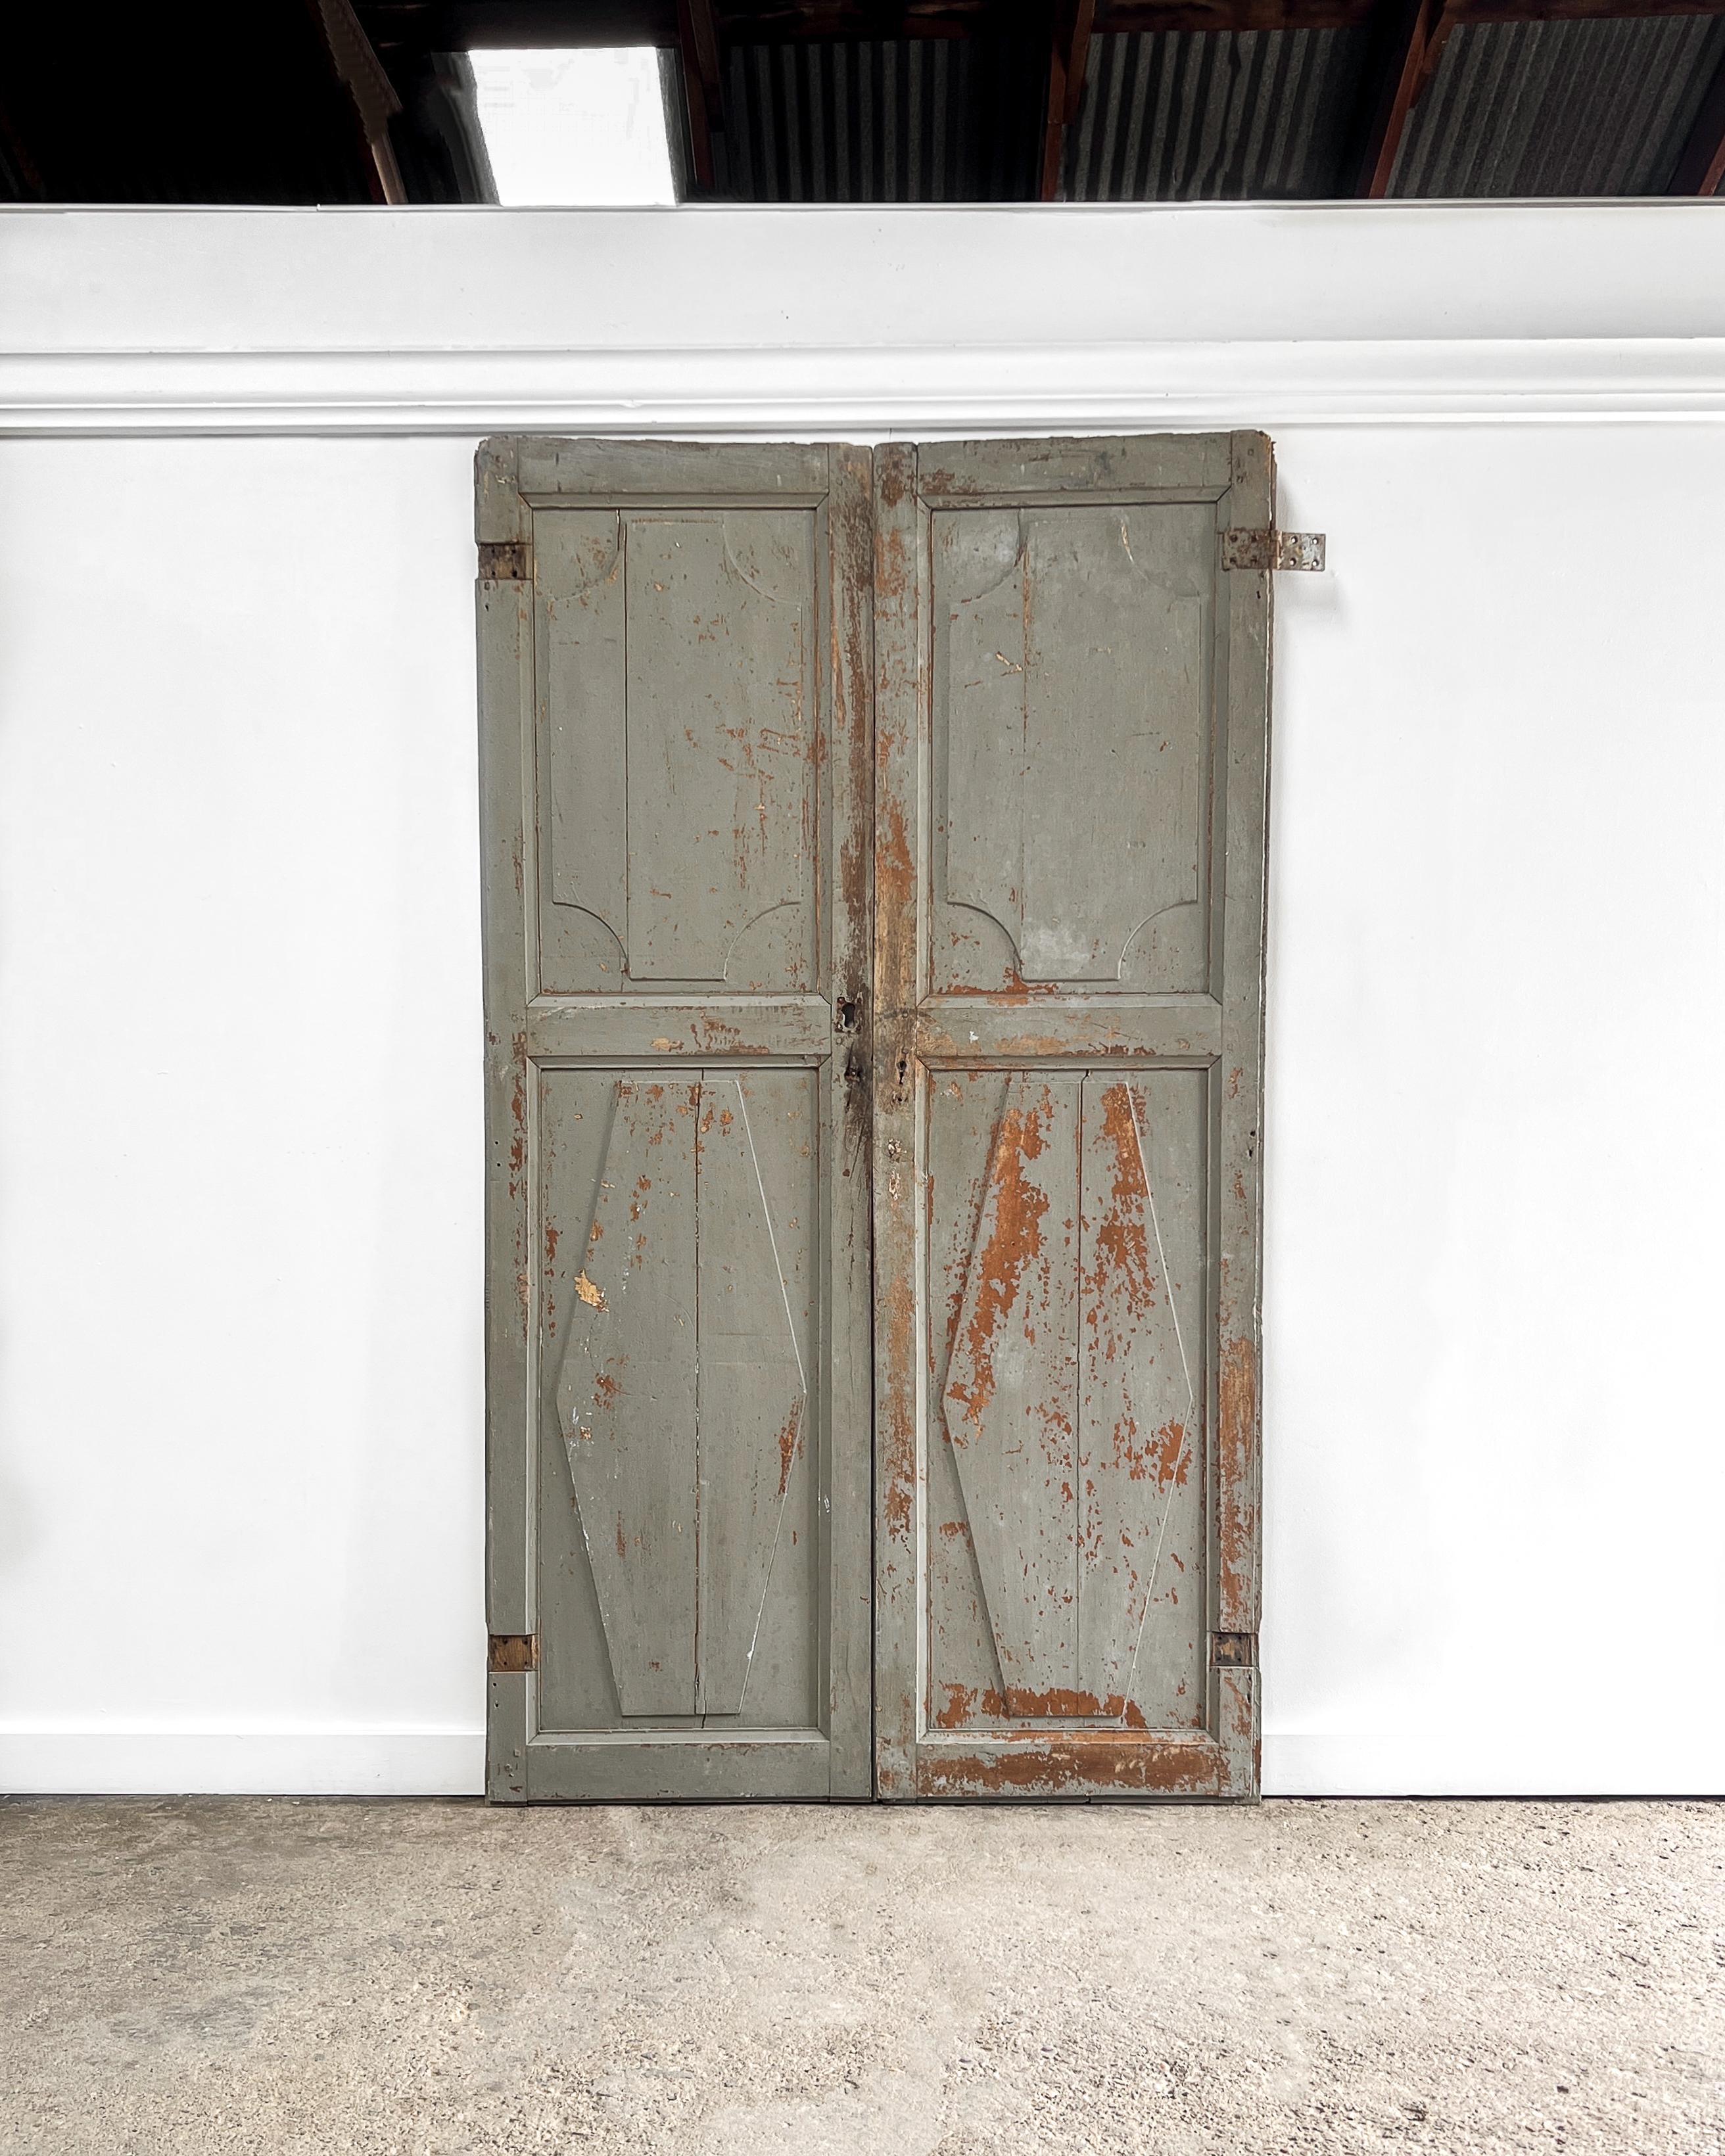 A pair of 19th-century antique French wardrobe doors. Handcrafted from solid wood, the front side of the doors feature two panels with decorative scalloped corner details, while the interior of the doors is a straightforward 3-panel